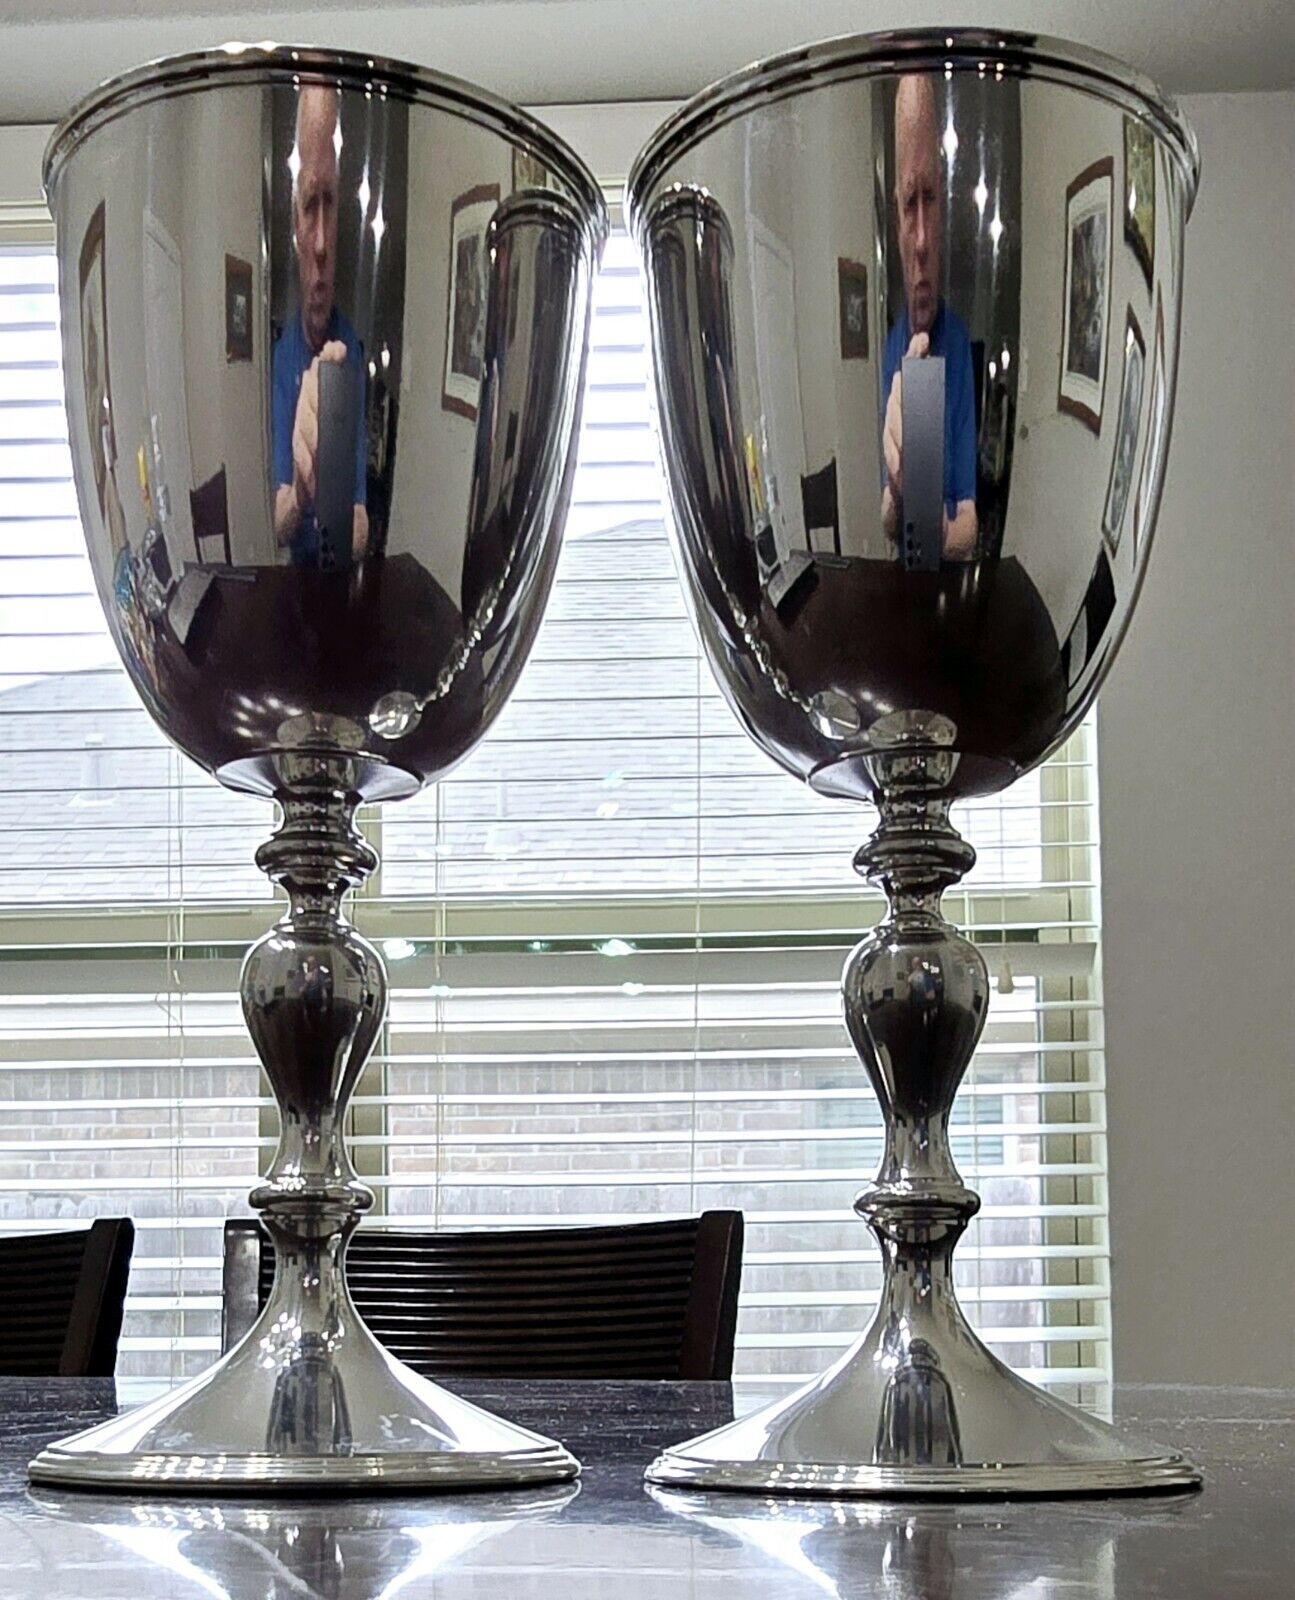 Royal Selangor Pewter Goblets Brilliant Pair Of Finely Turned Pewter